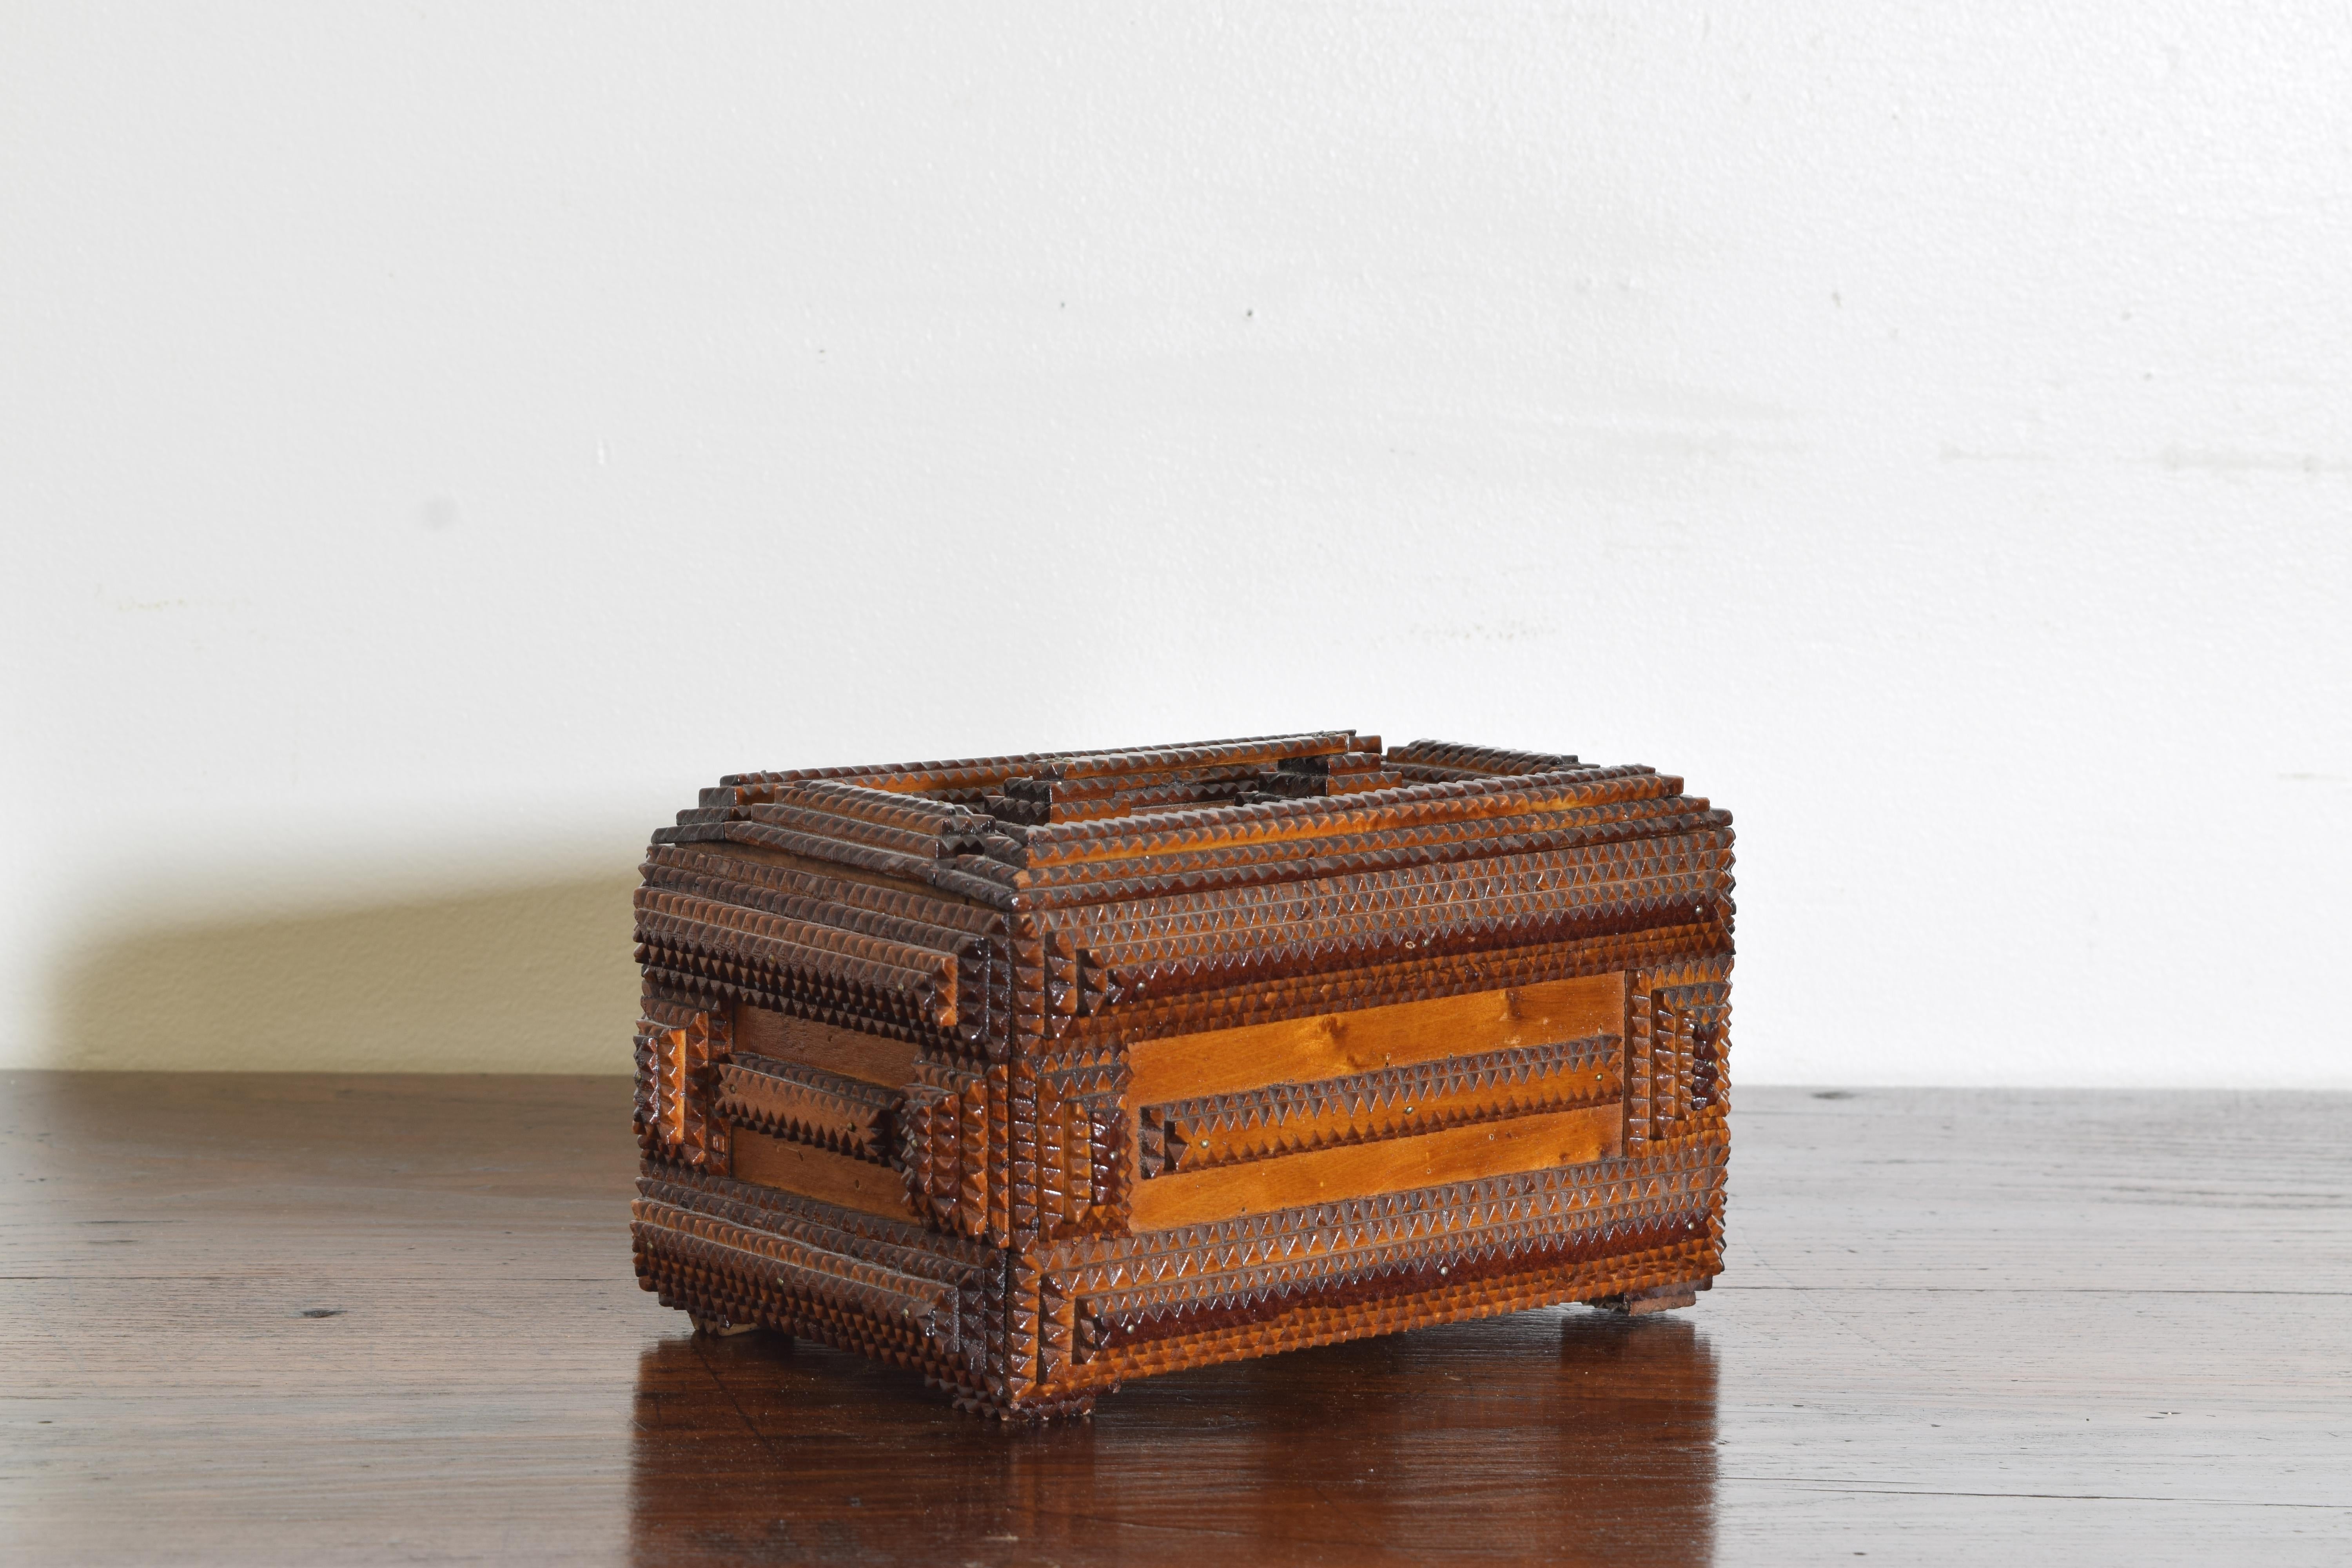 Rectangular box adorned with panels of geometric carvings popular in the early 20th century and known as Tramp Art